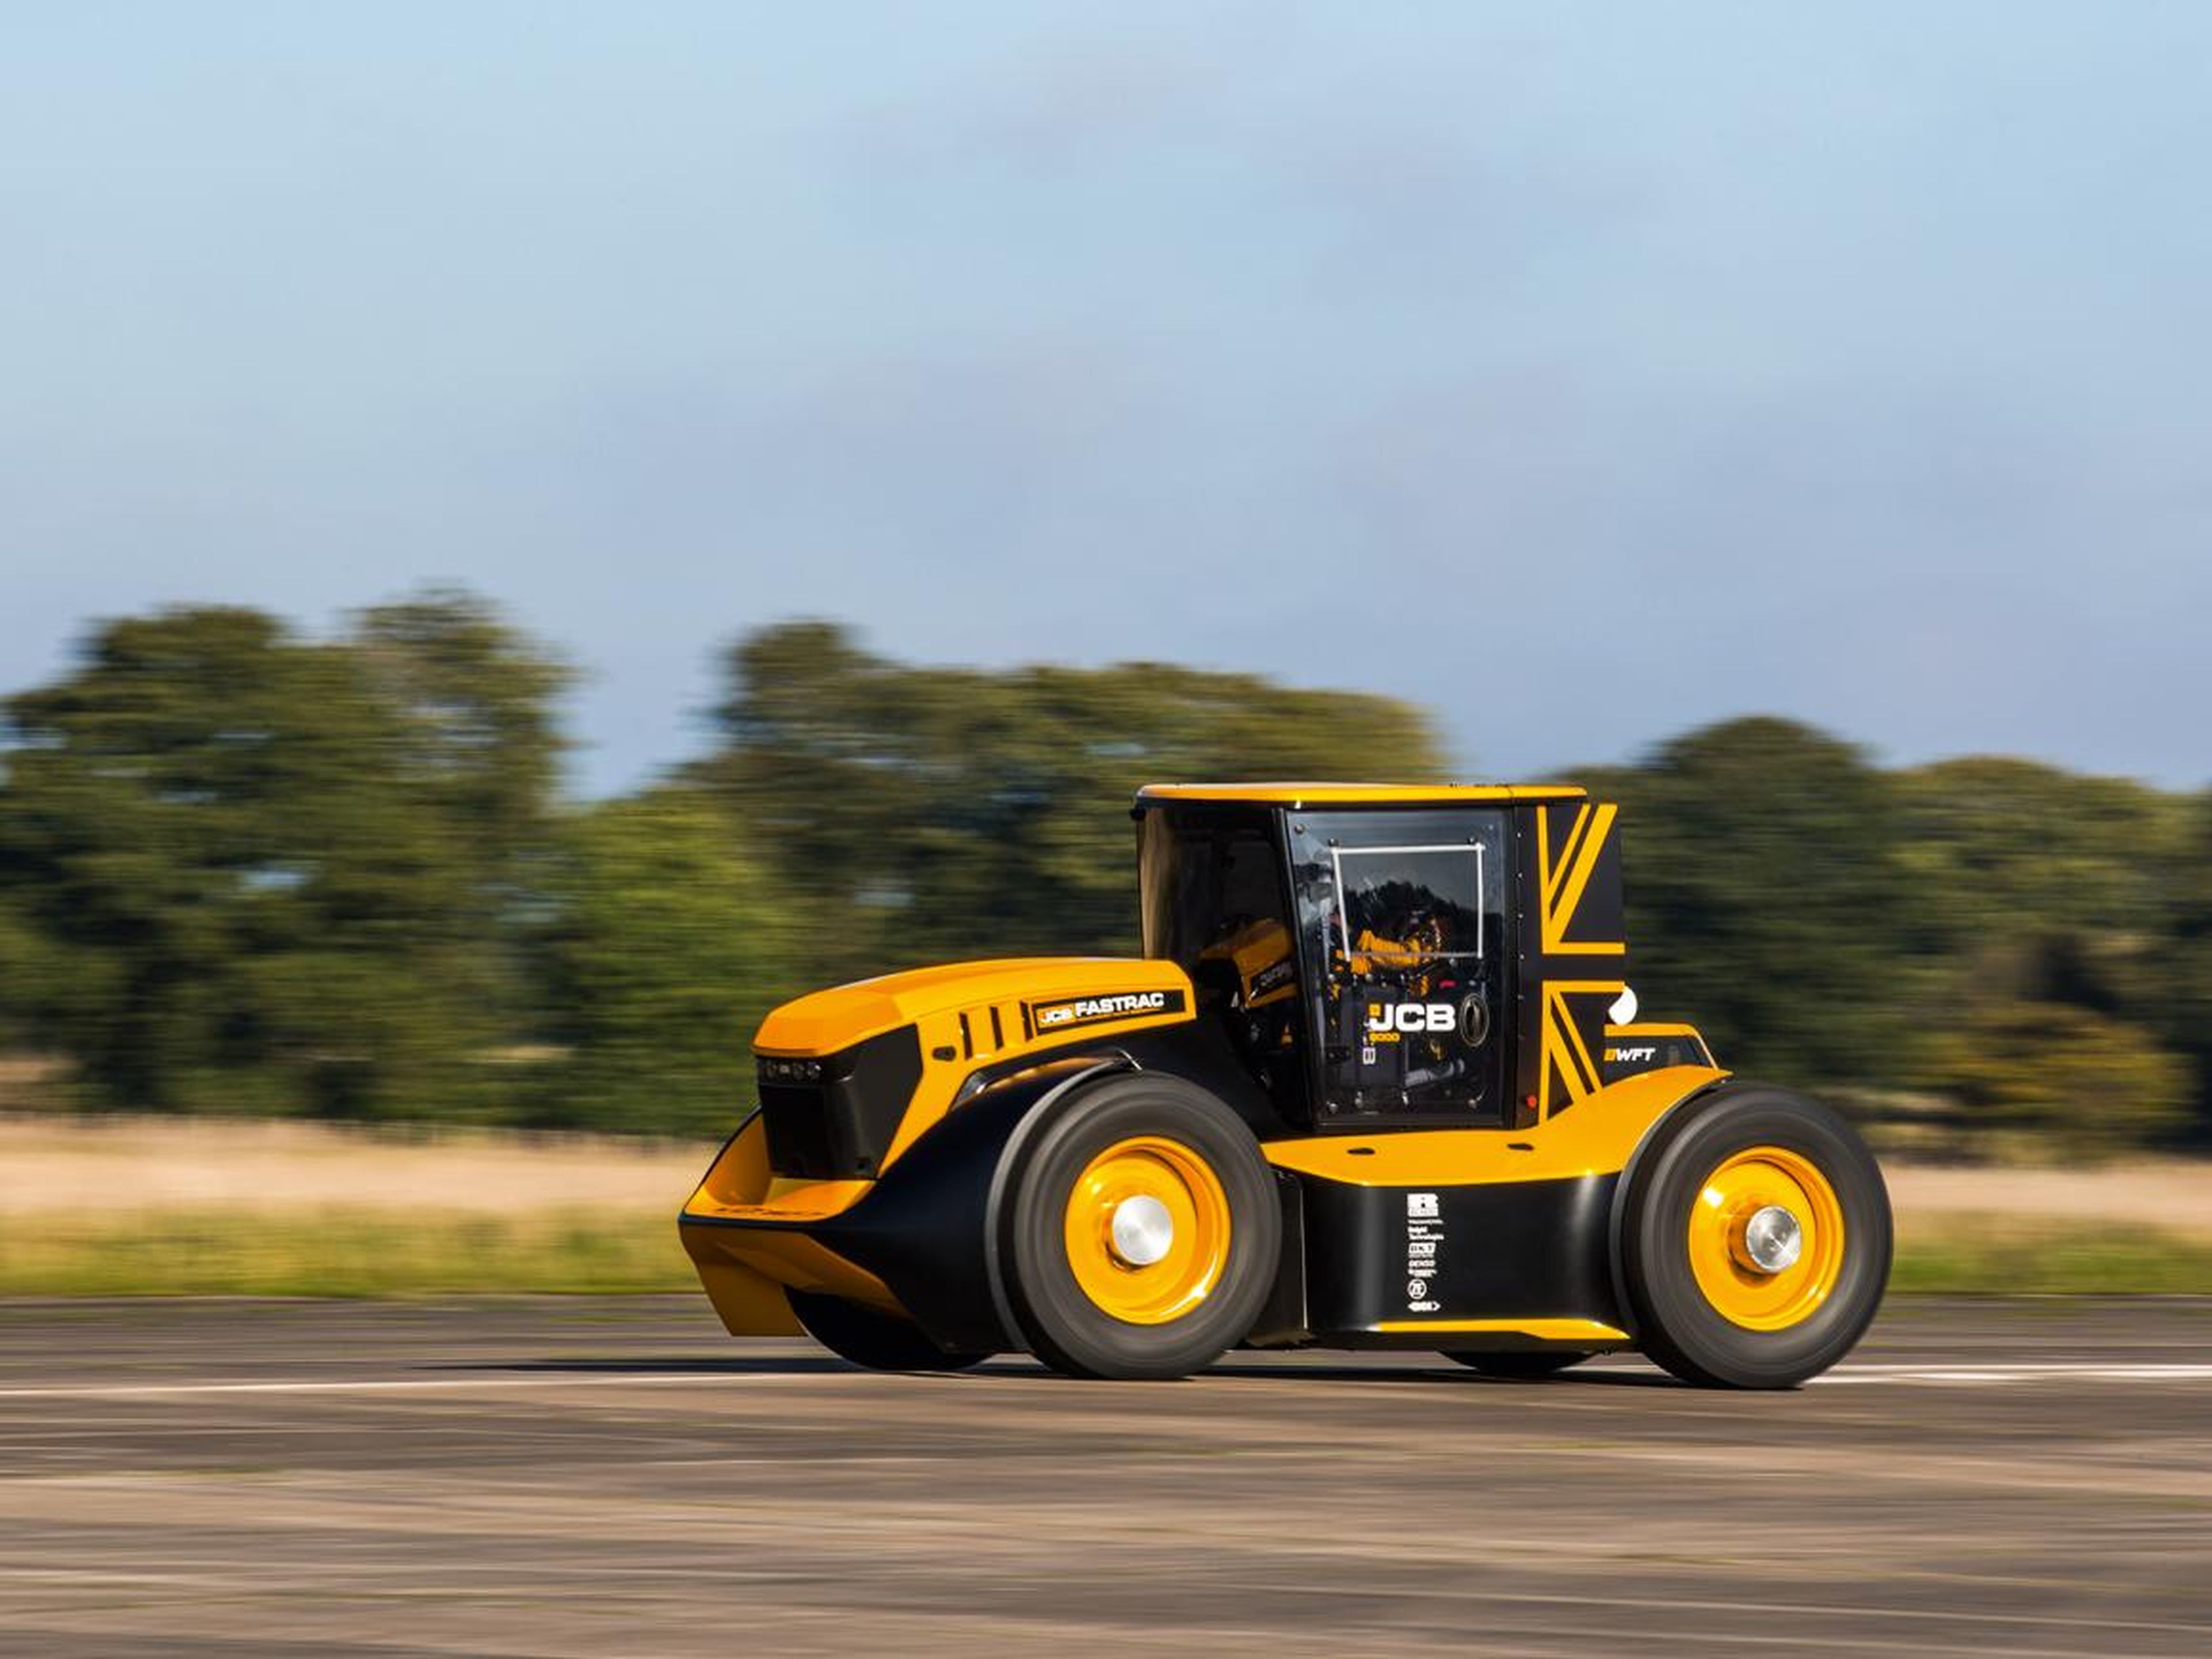 The tractor achieves 5 miles-per-gallon, and the record-setting run was done with a 5.2-gallon fuel tank.